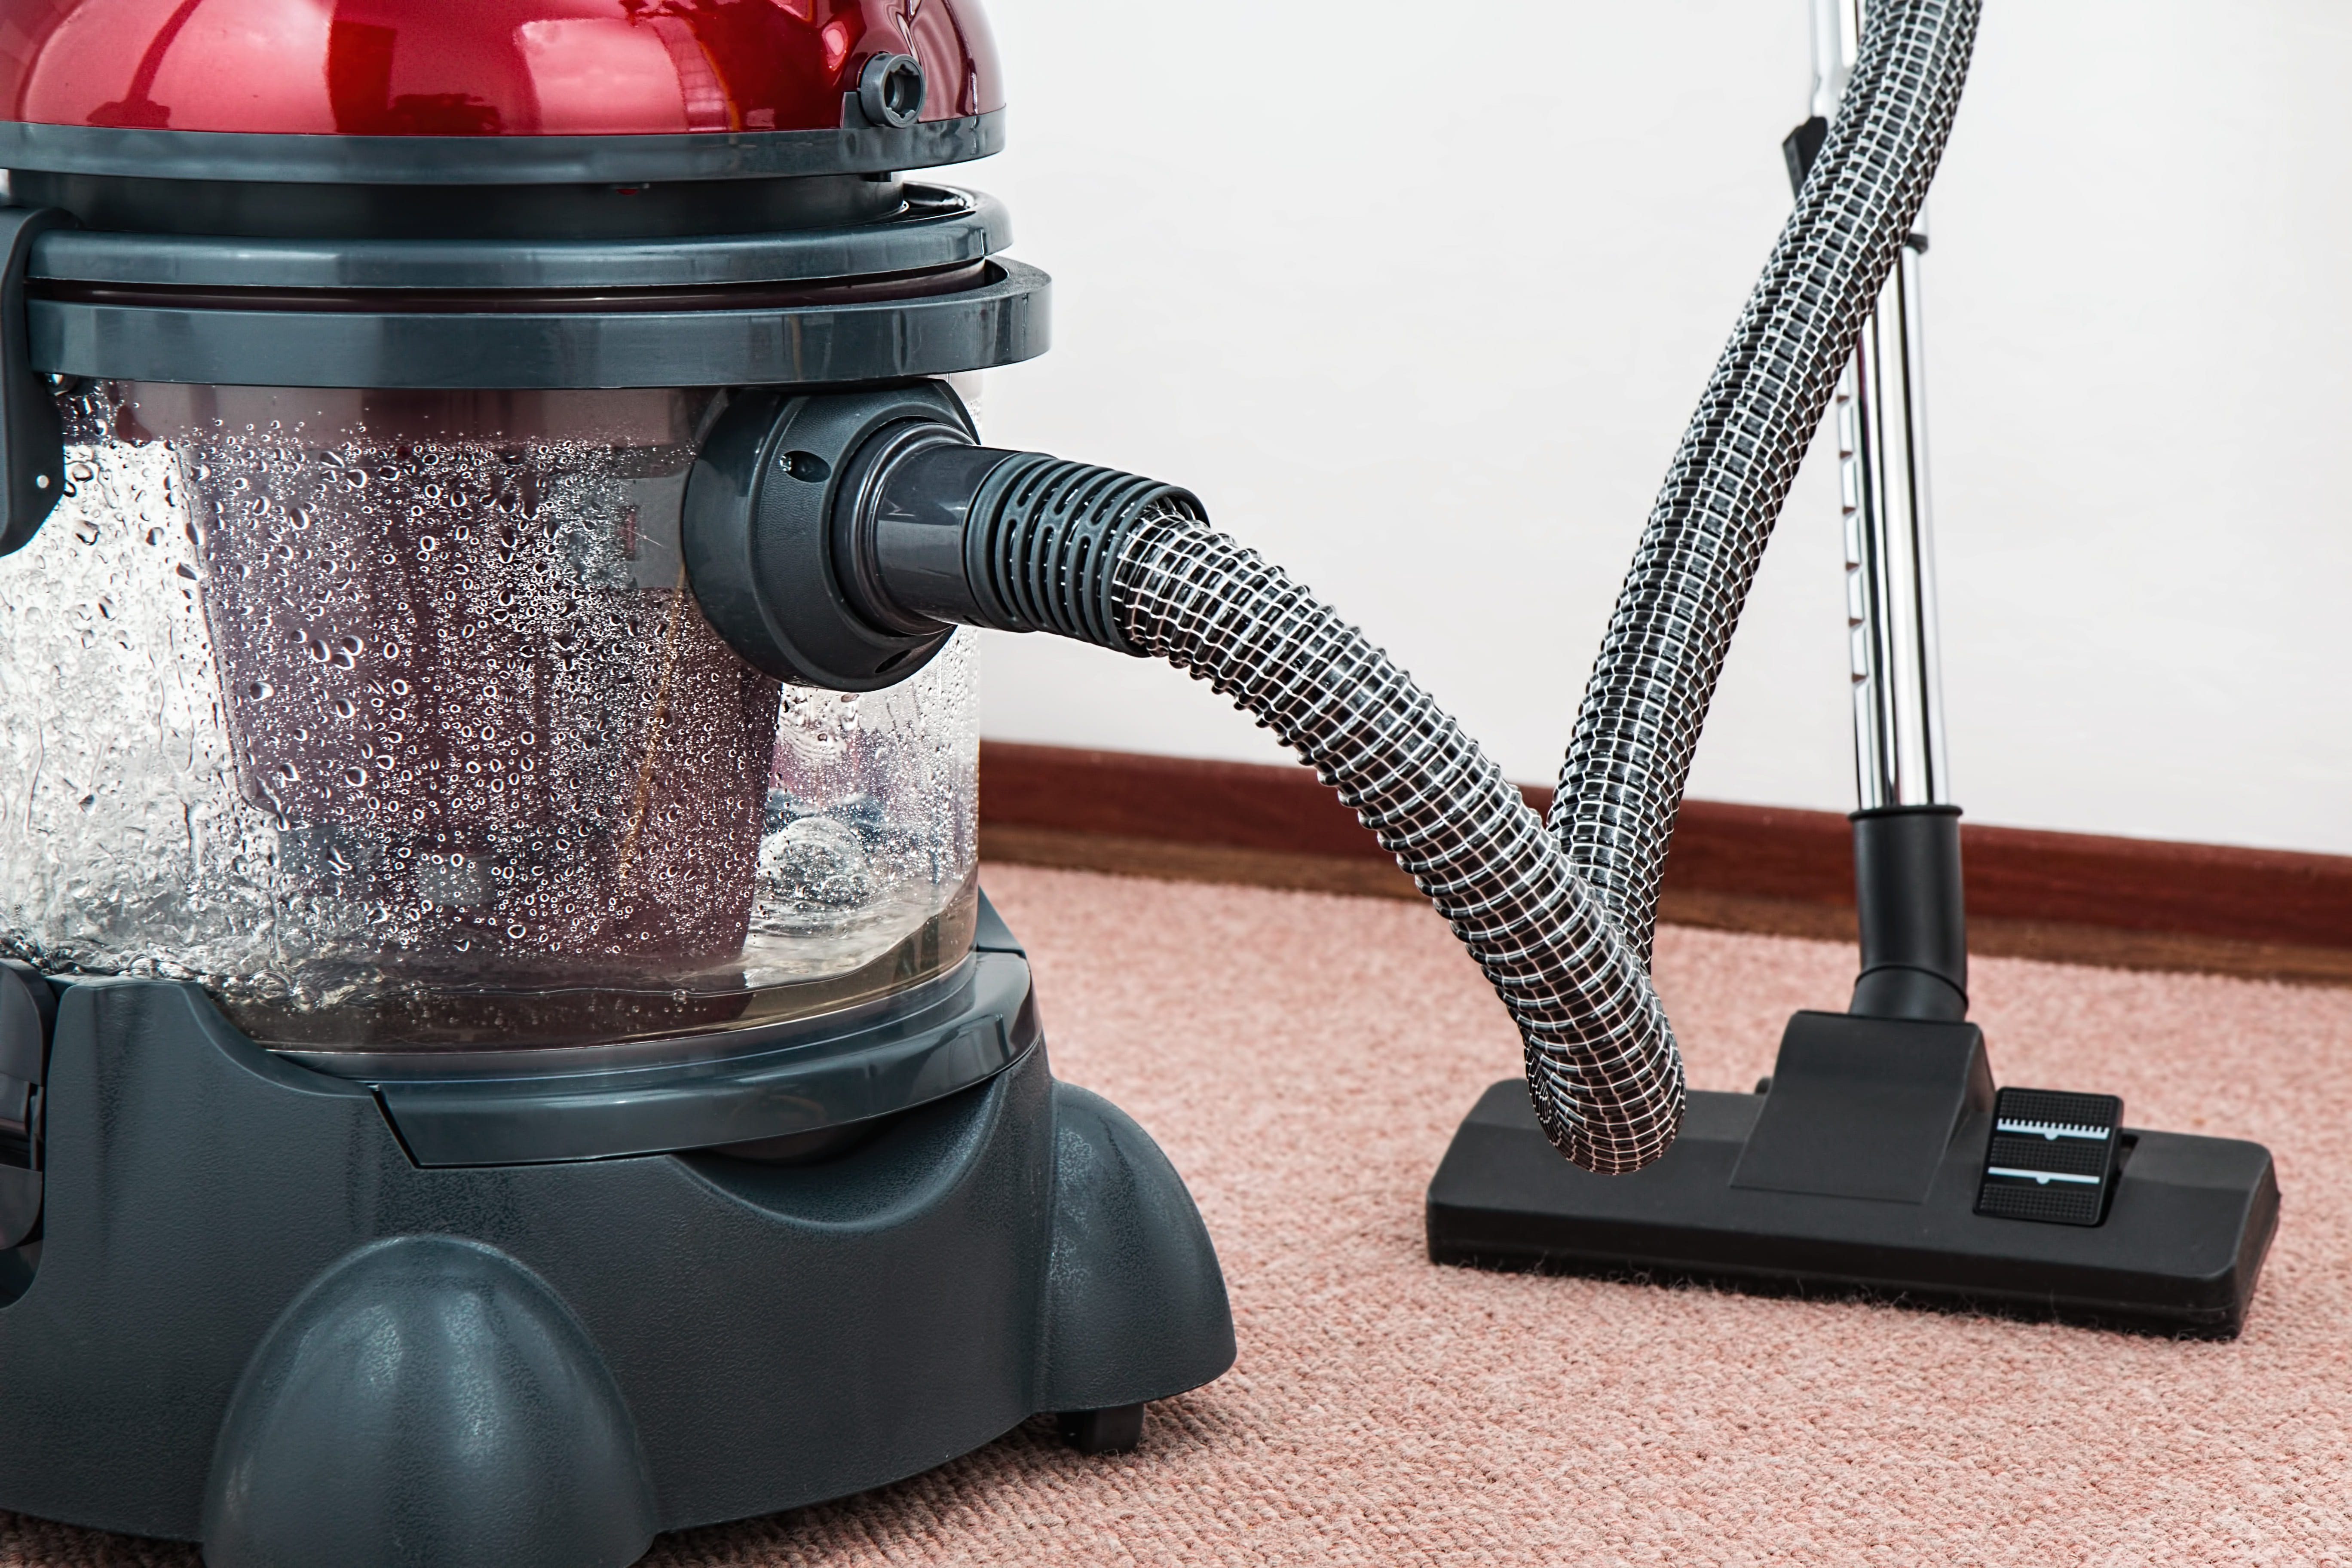 red and black wet/dry vacuum cleaner, carpet cleaner, housework